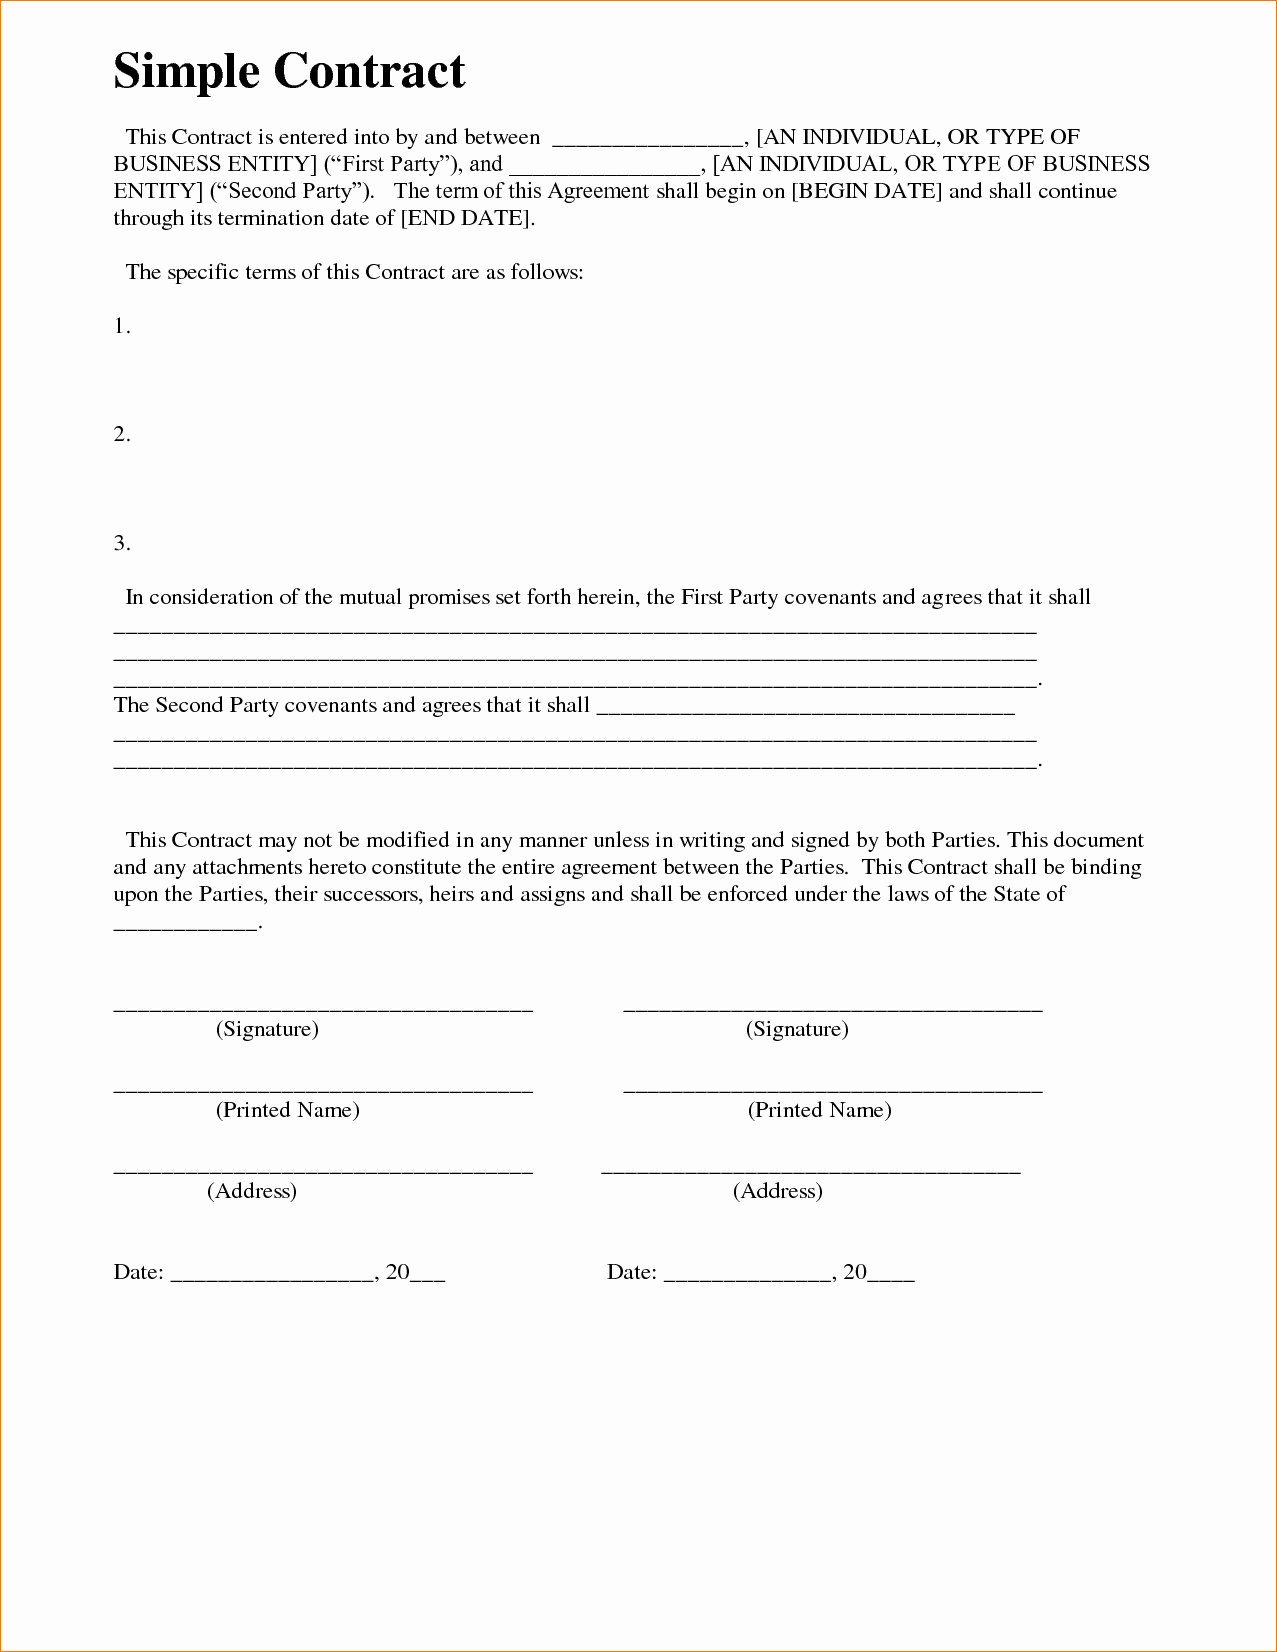 Simple Payment Agreement Template Beautiful Simple Contract Agreement